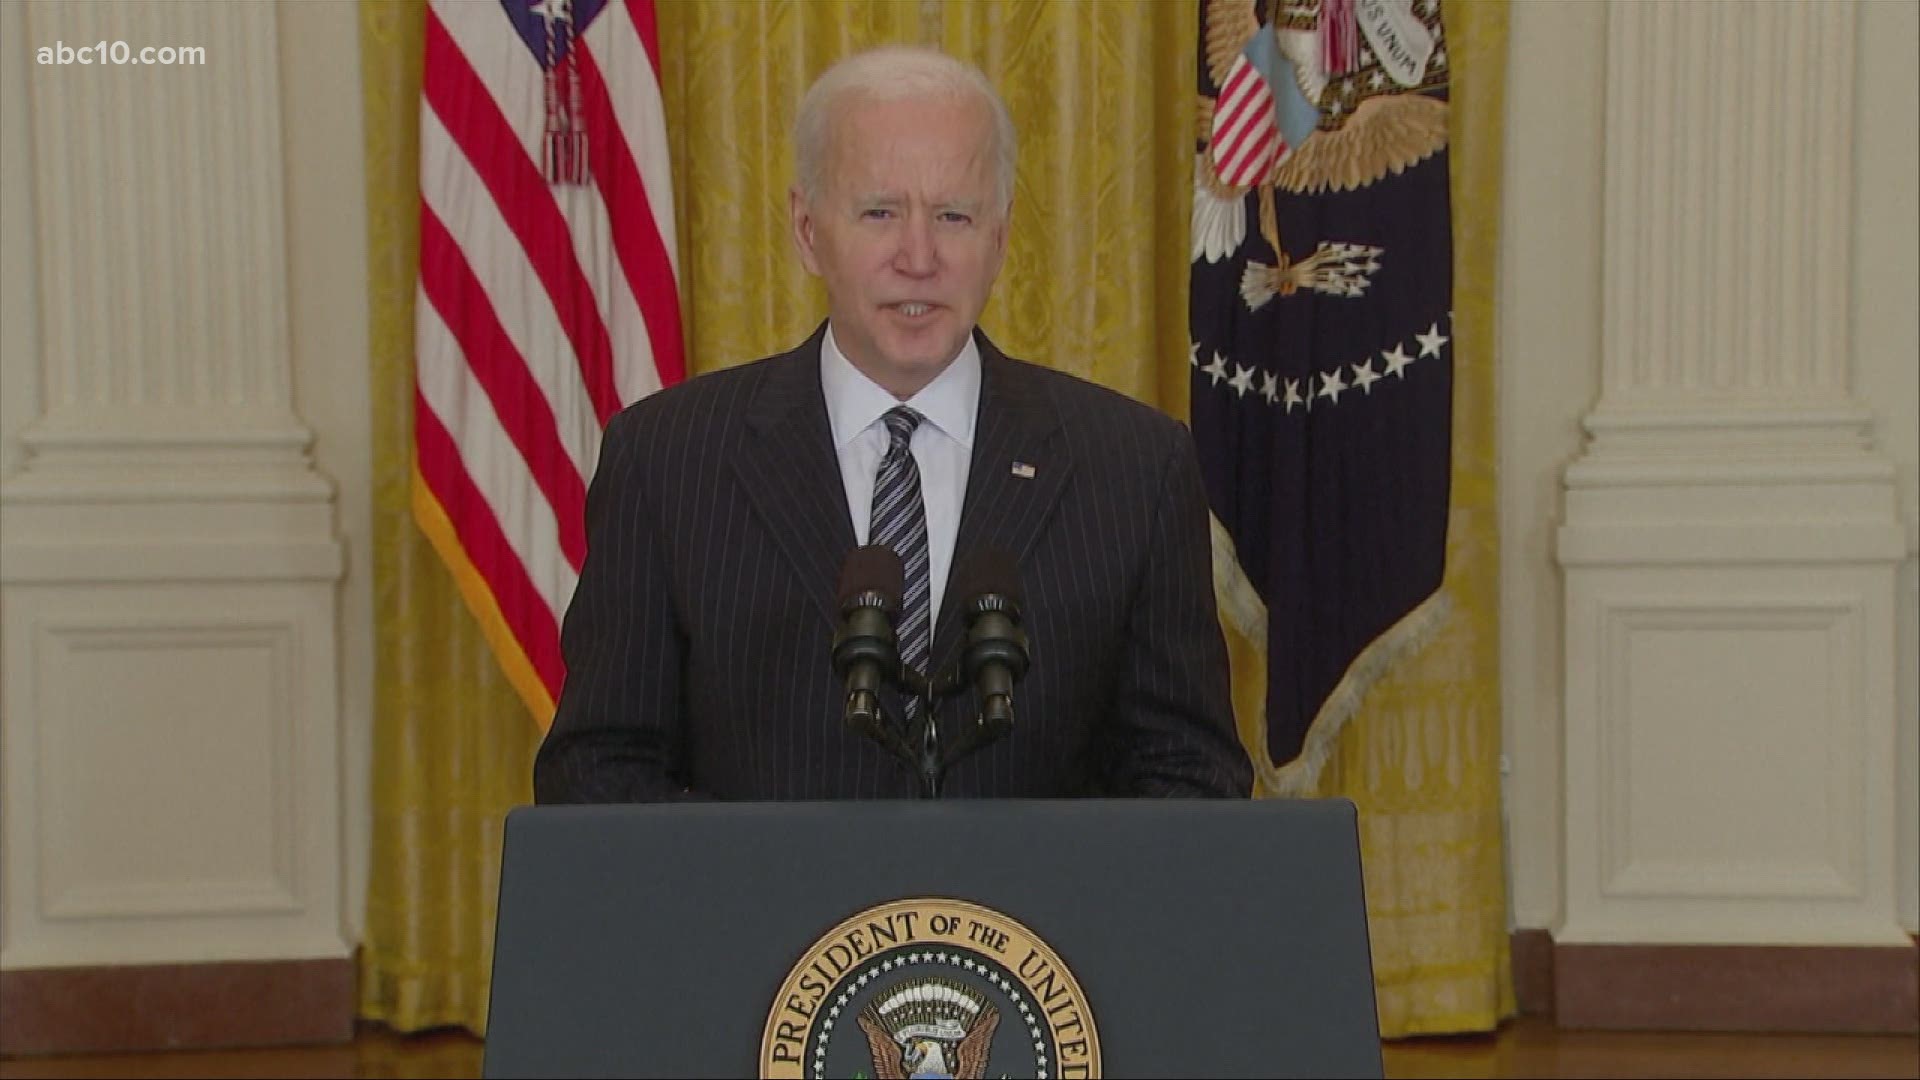 President Biden says the country will reach the goal of 100 million vaccines distributed within his first 100 days in office.